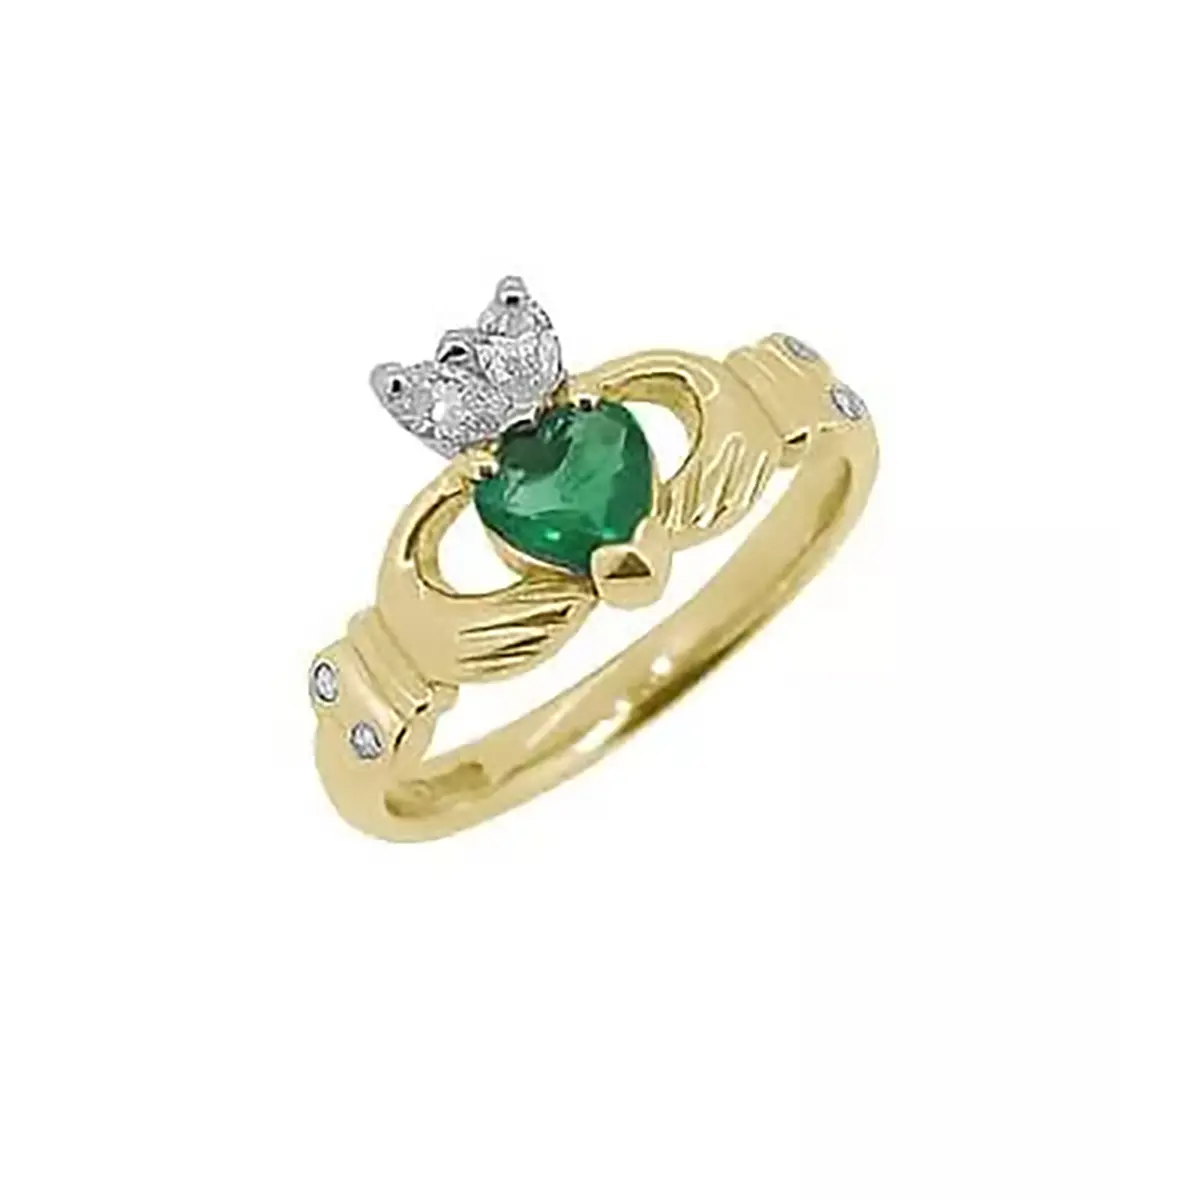 Product Review Gold Emerald And Diamond Claddagh Ring from Ireland